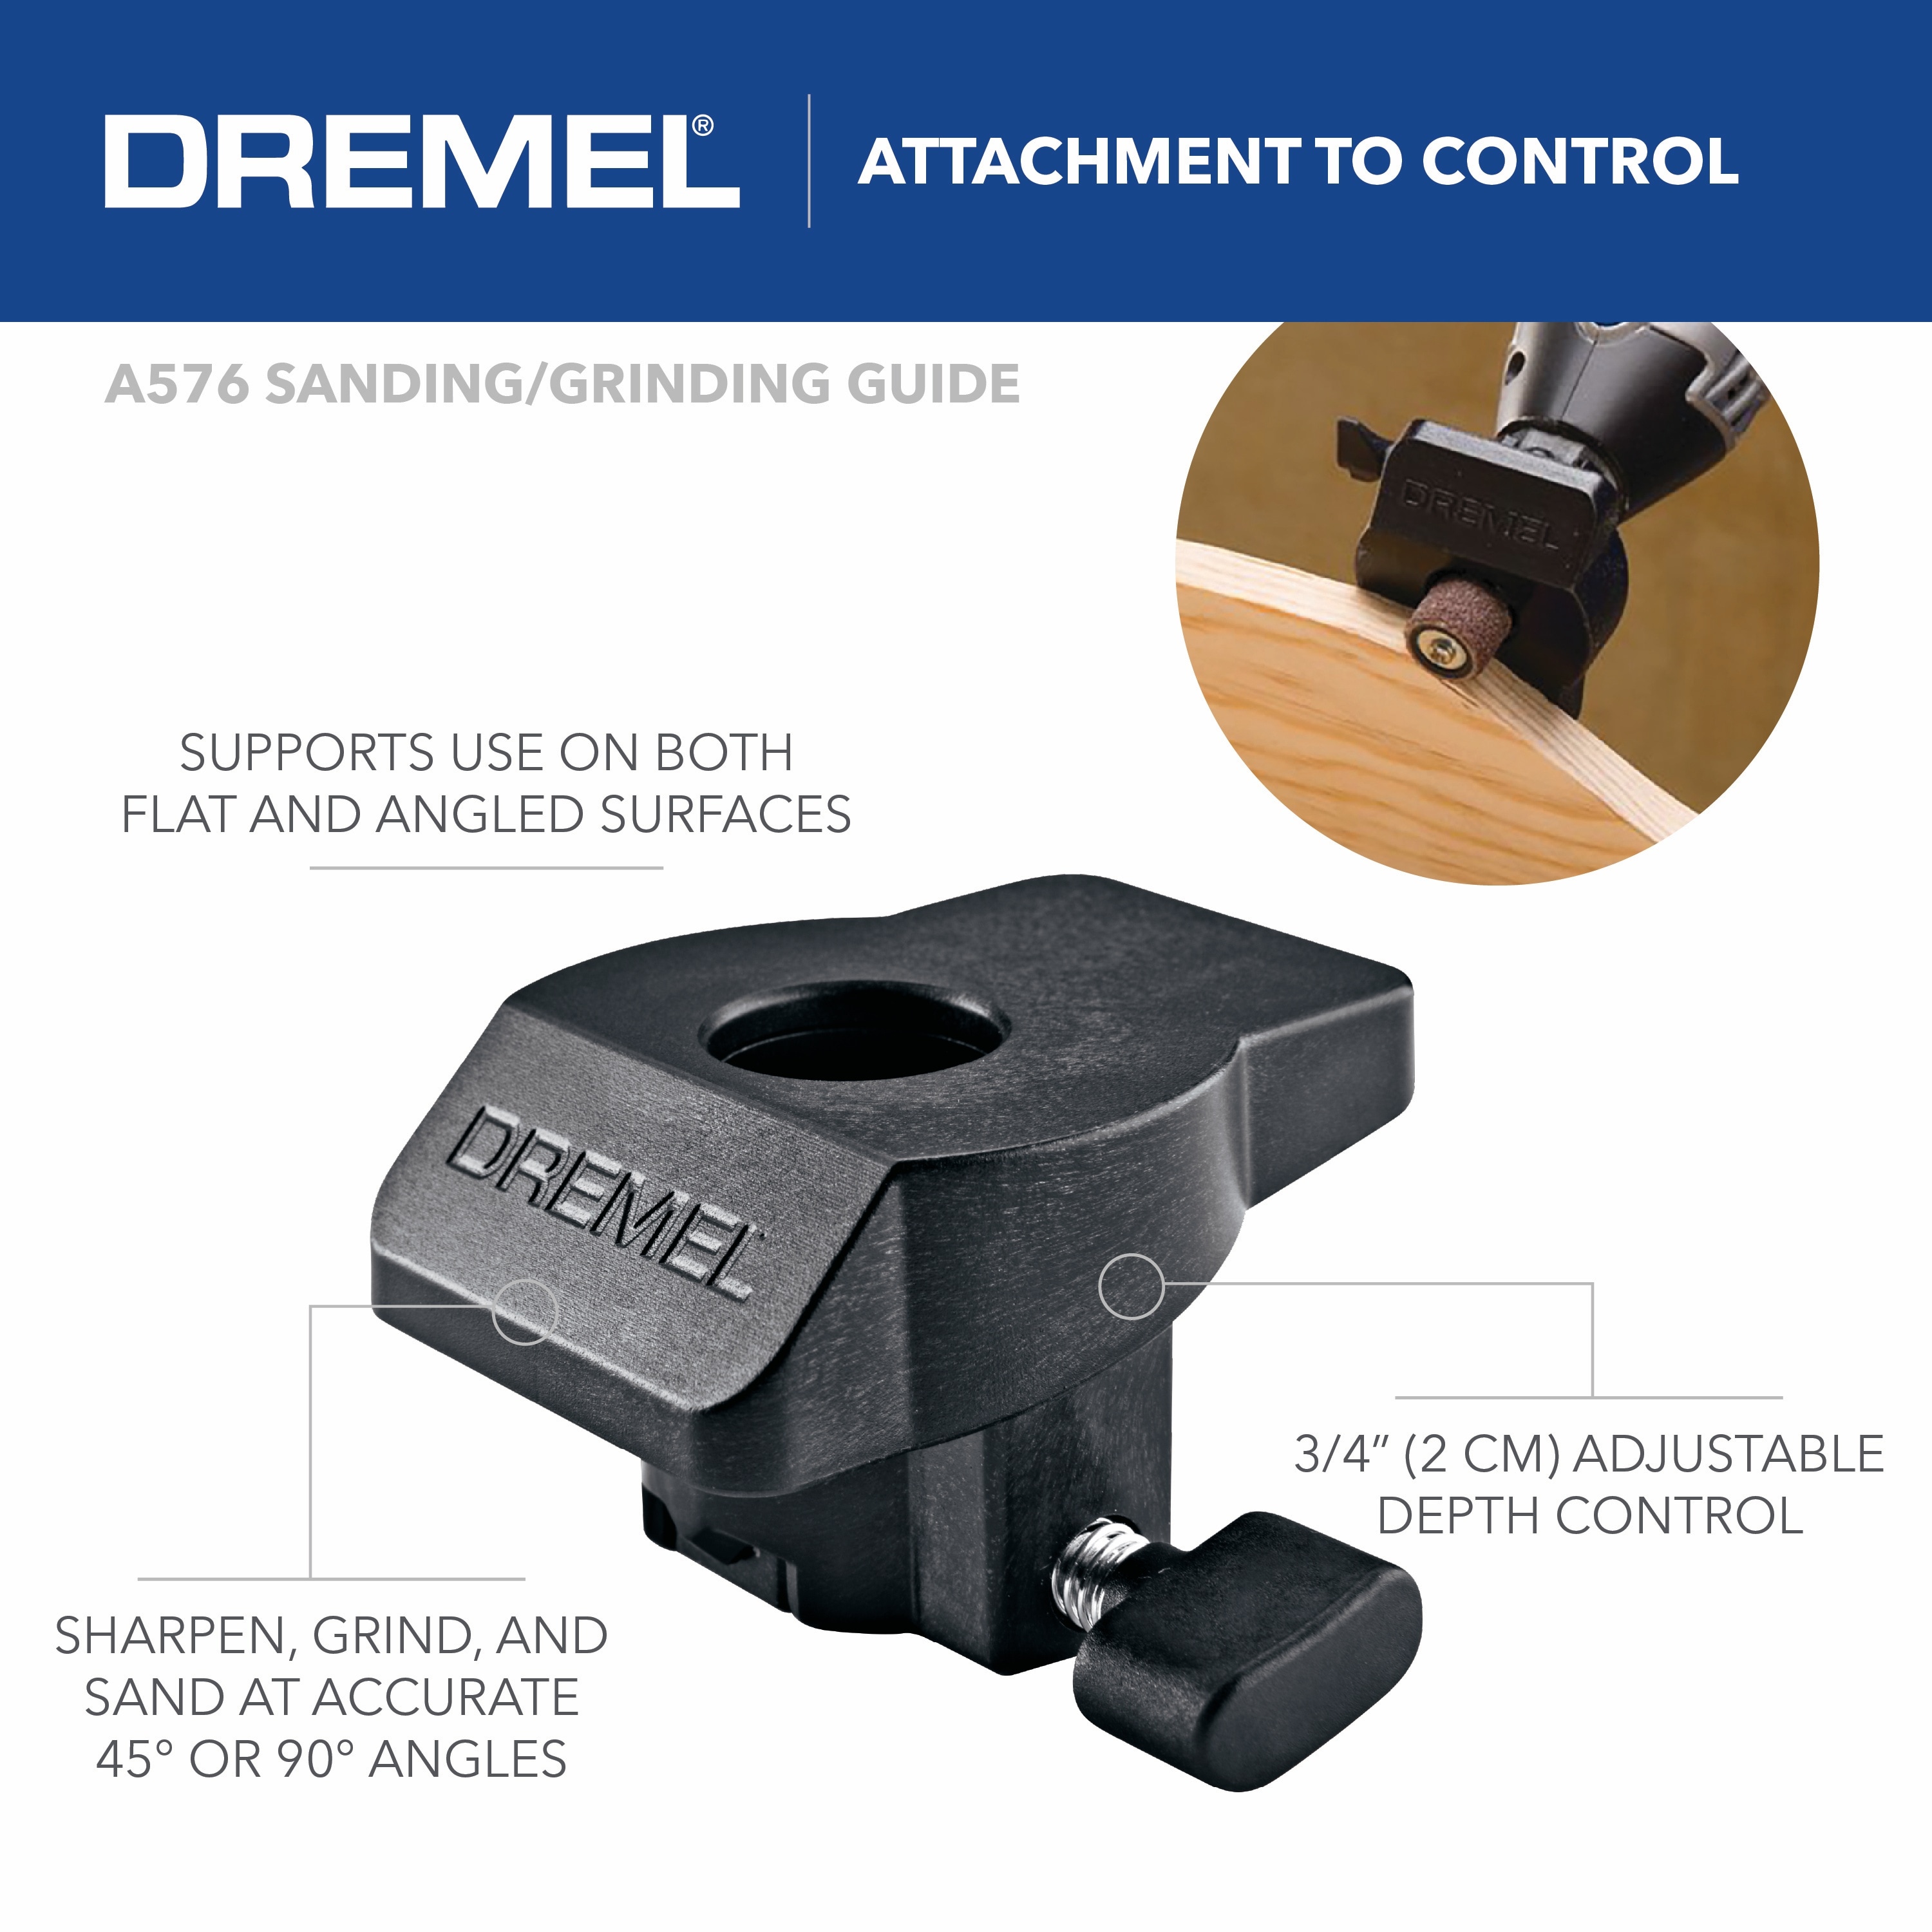 You Need This Tool - Episode 78  Dremel Variable Speed Rotary